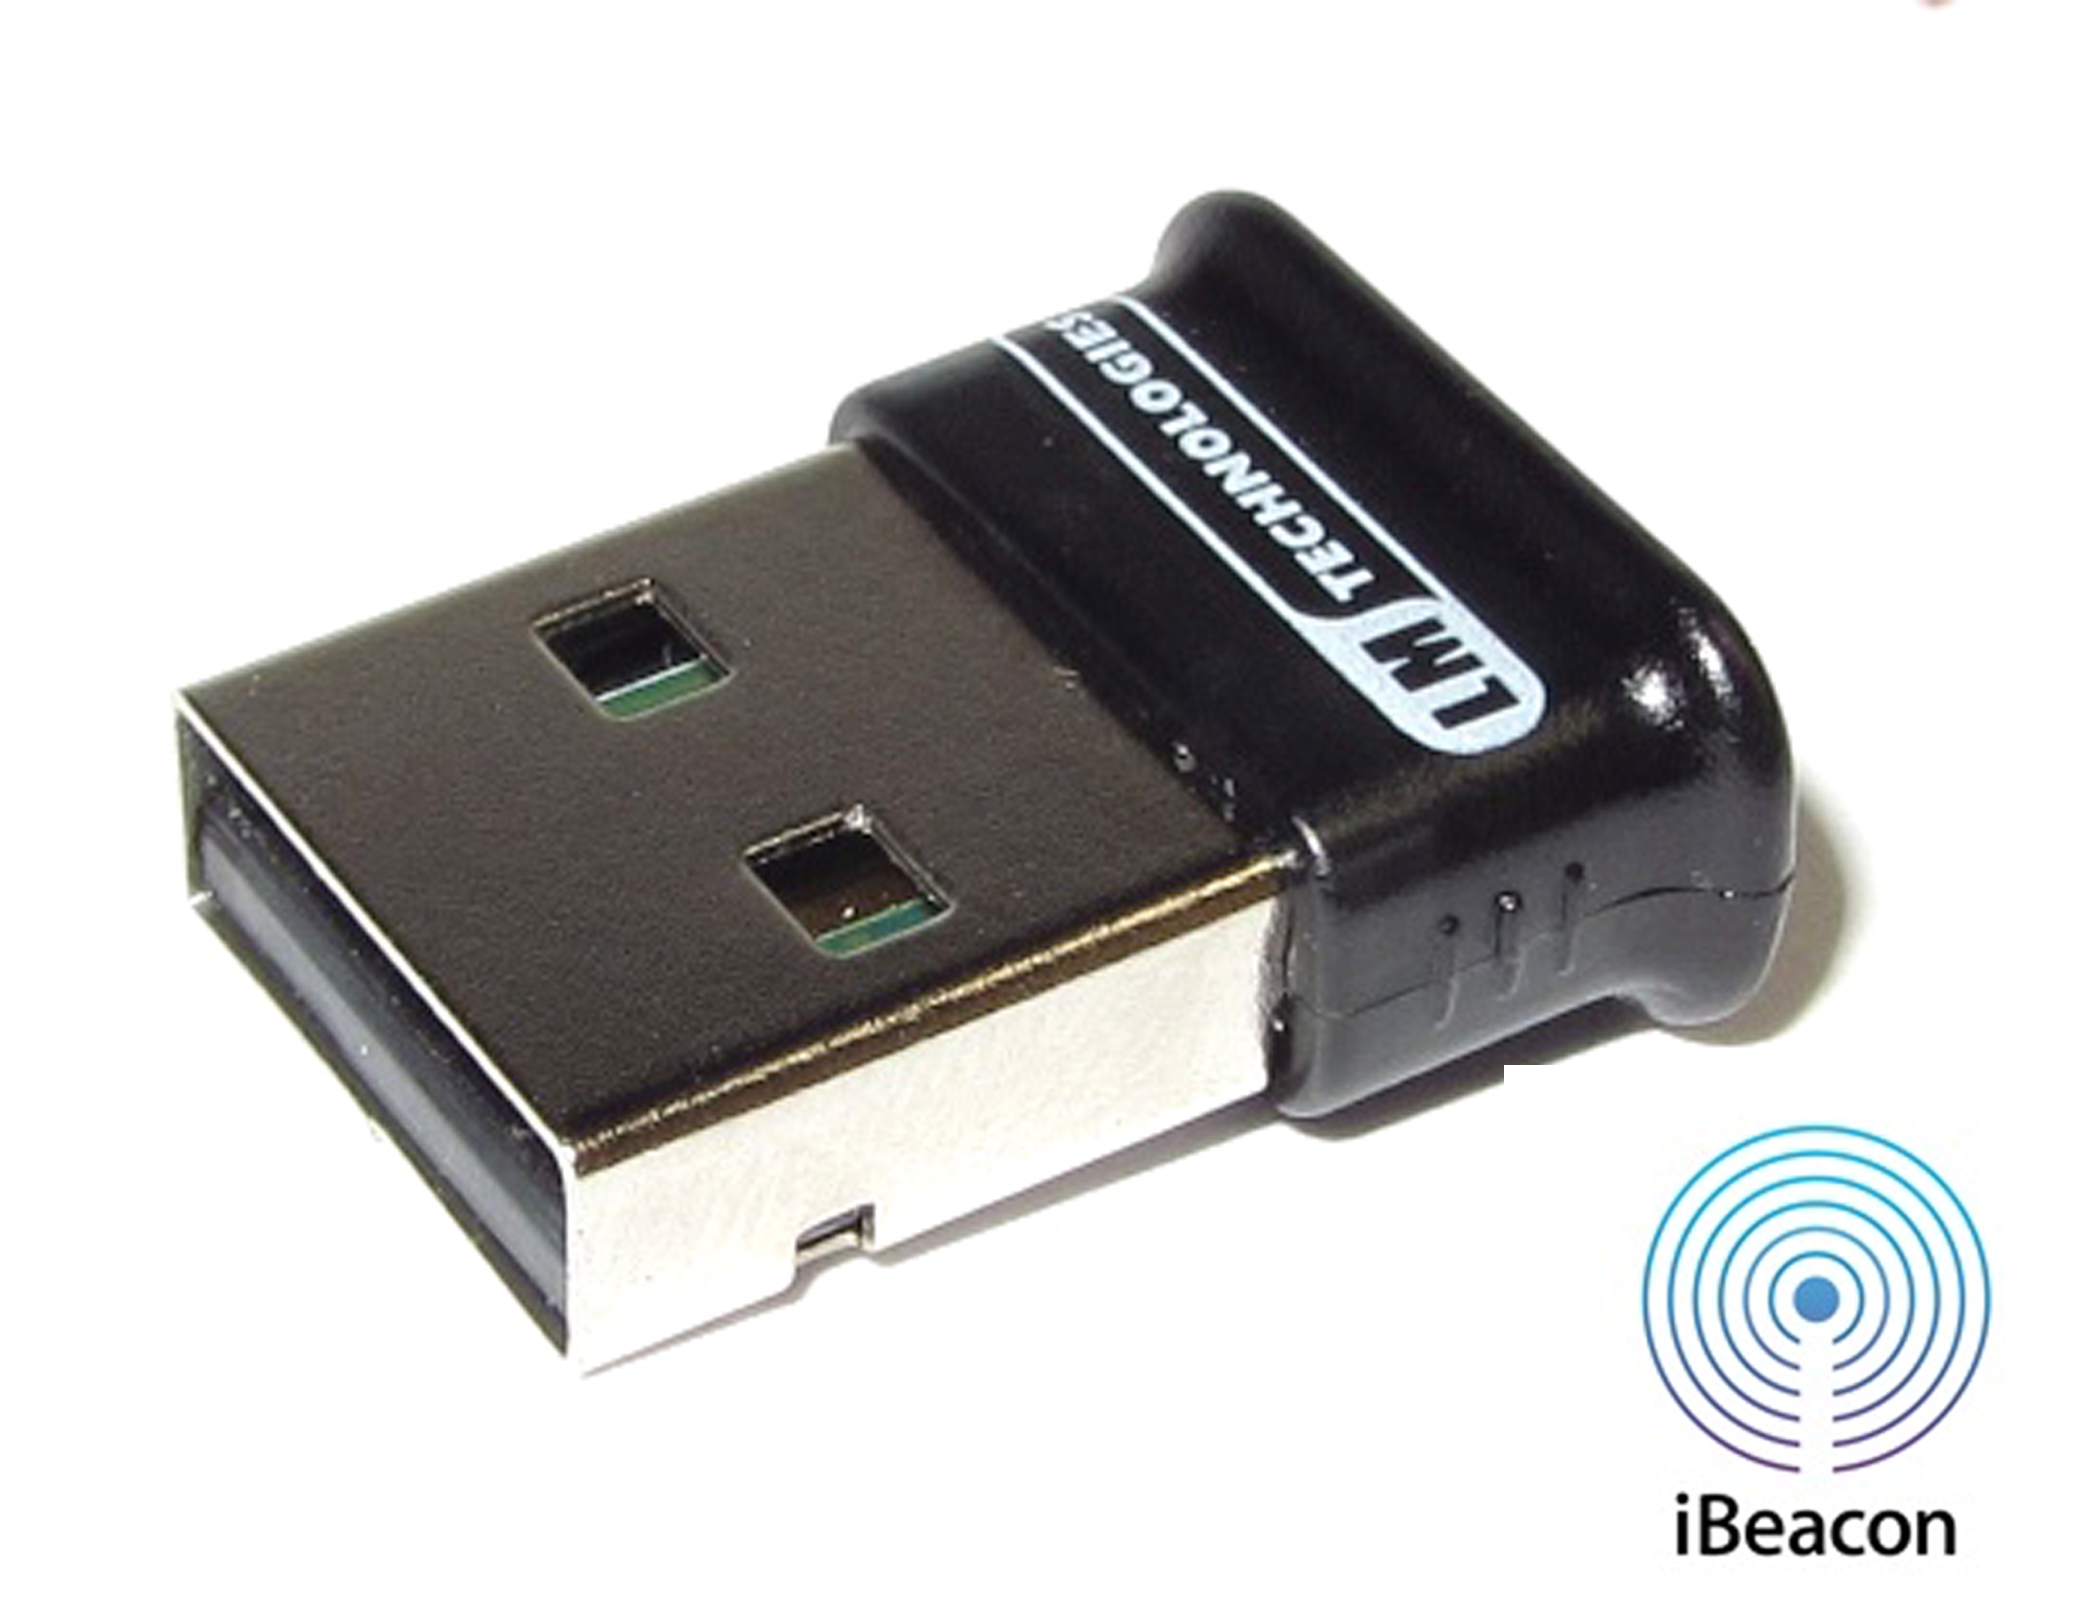 Bluetooth Usb Dongle Software Download